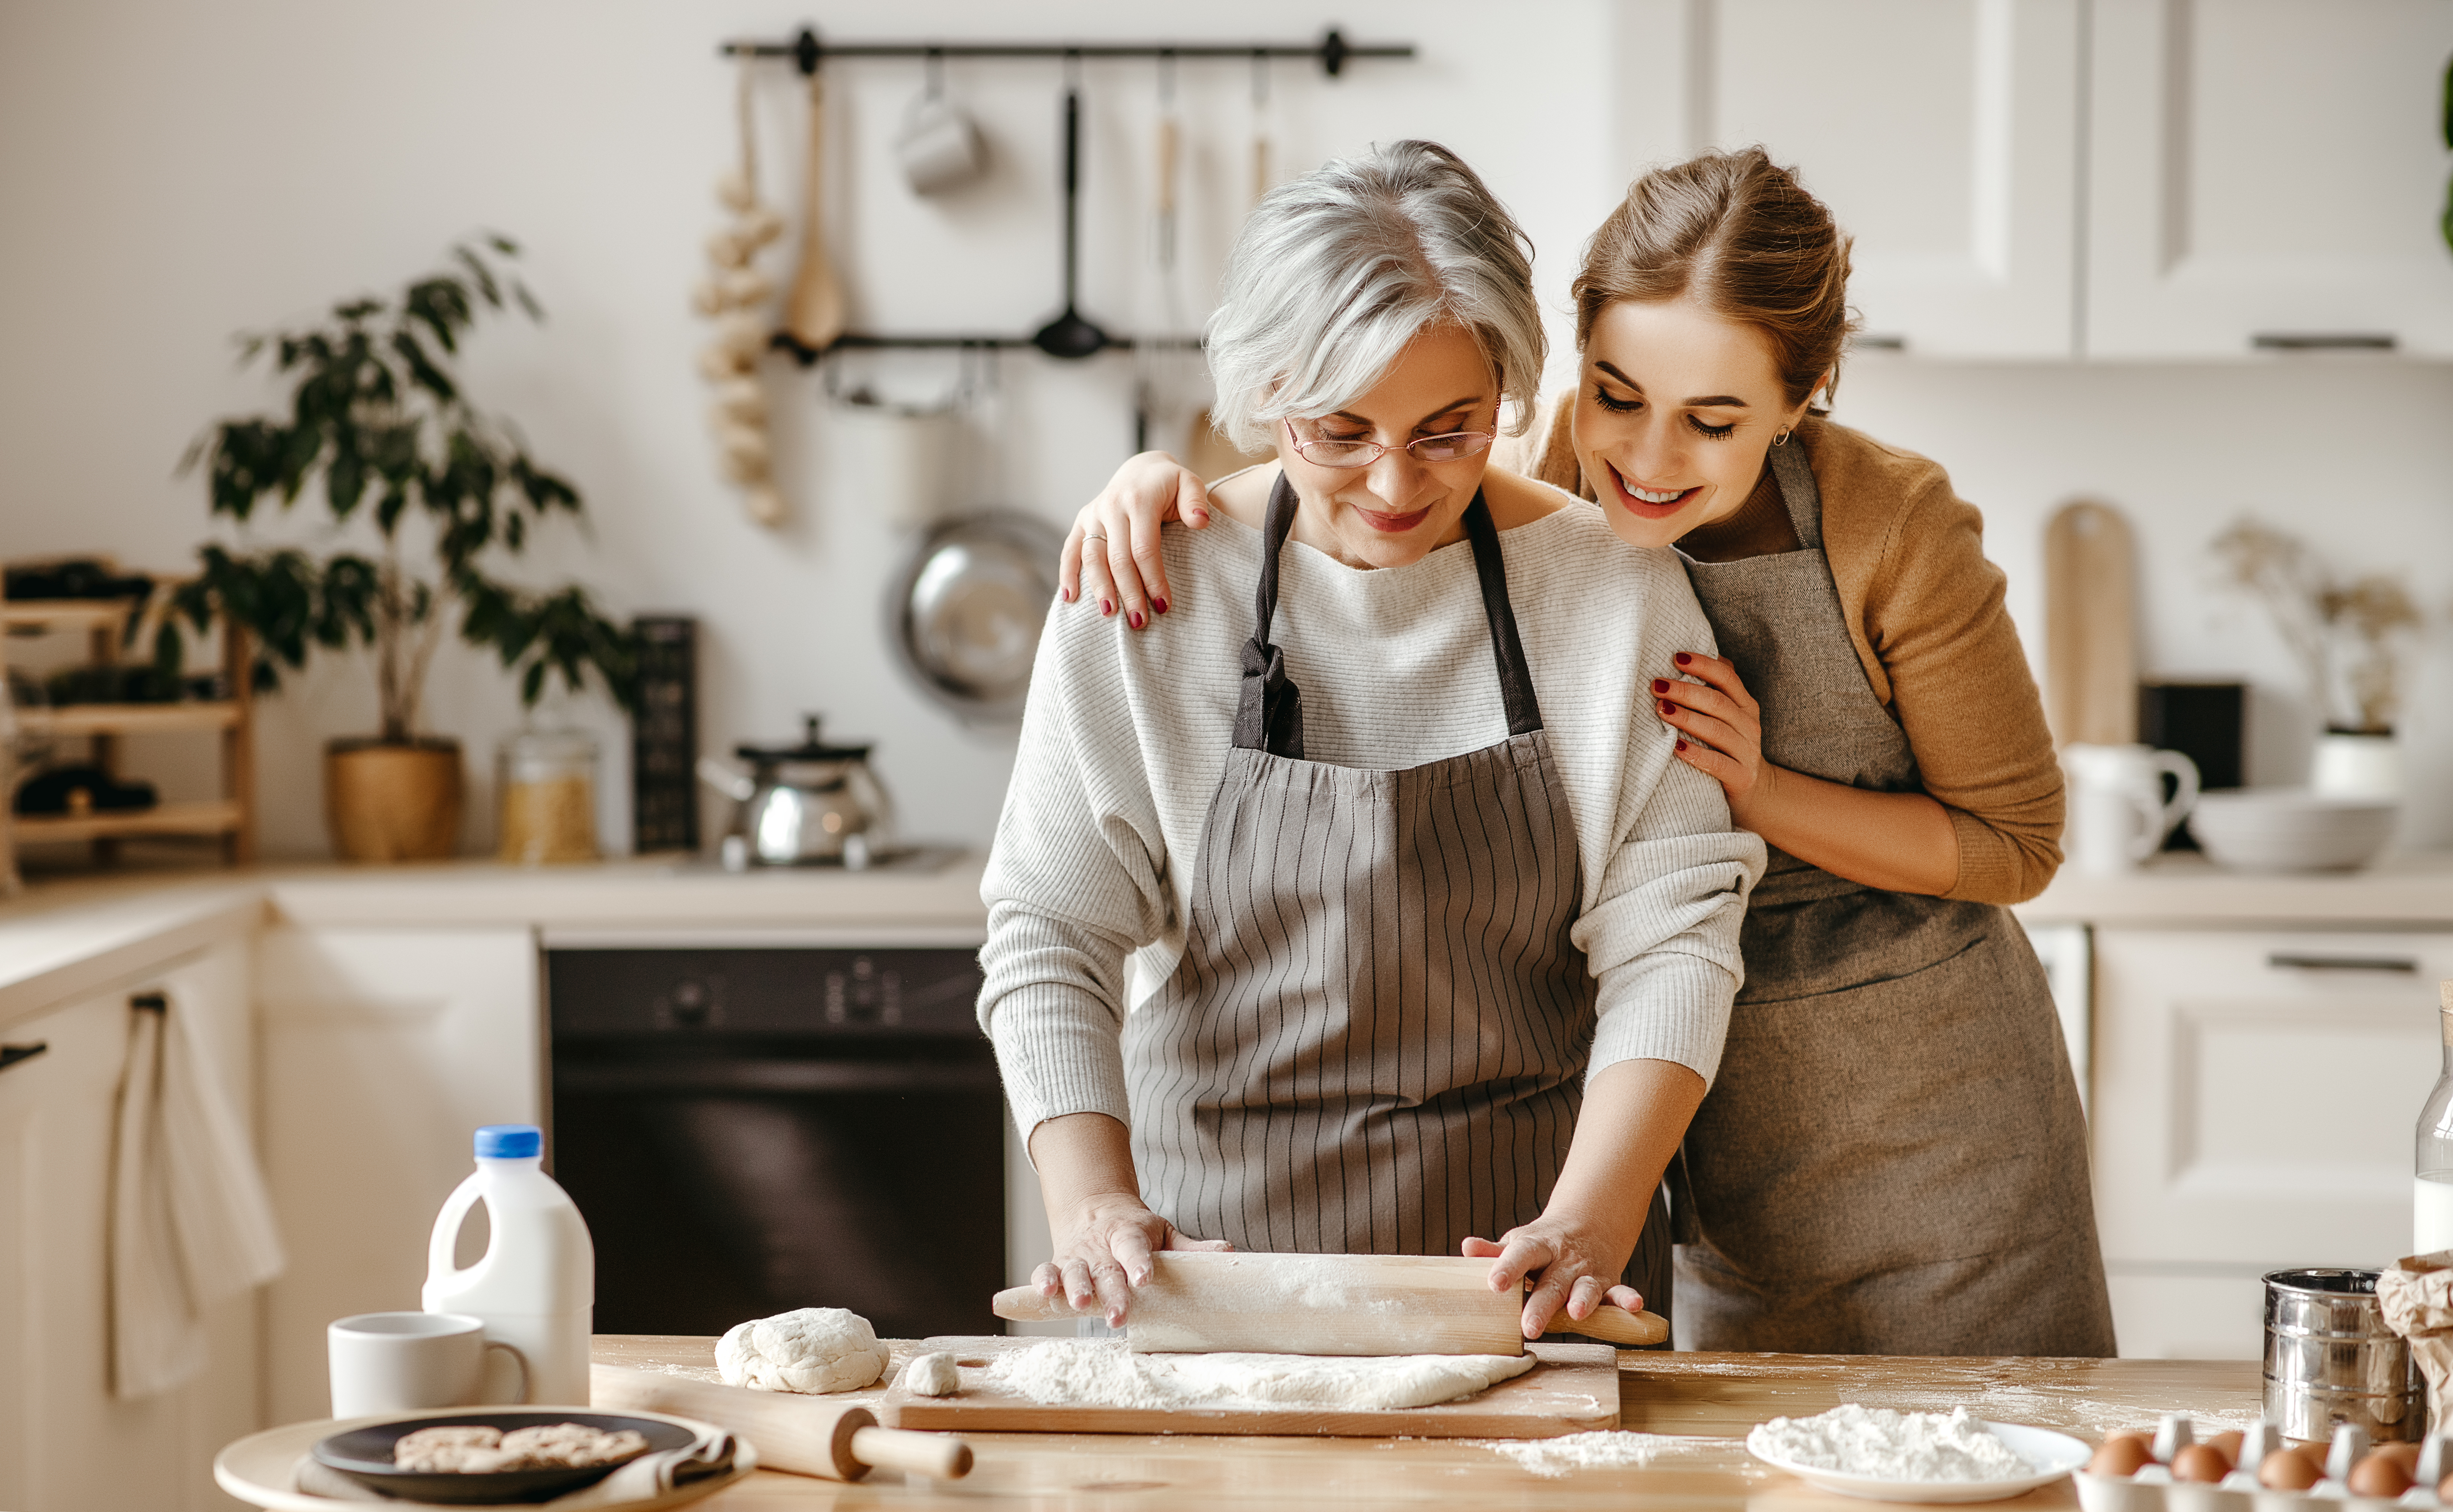 A woman lovingly embracing her mother-in-law while they bond over baking | Source: Shutterstock